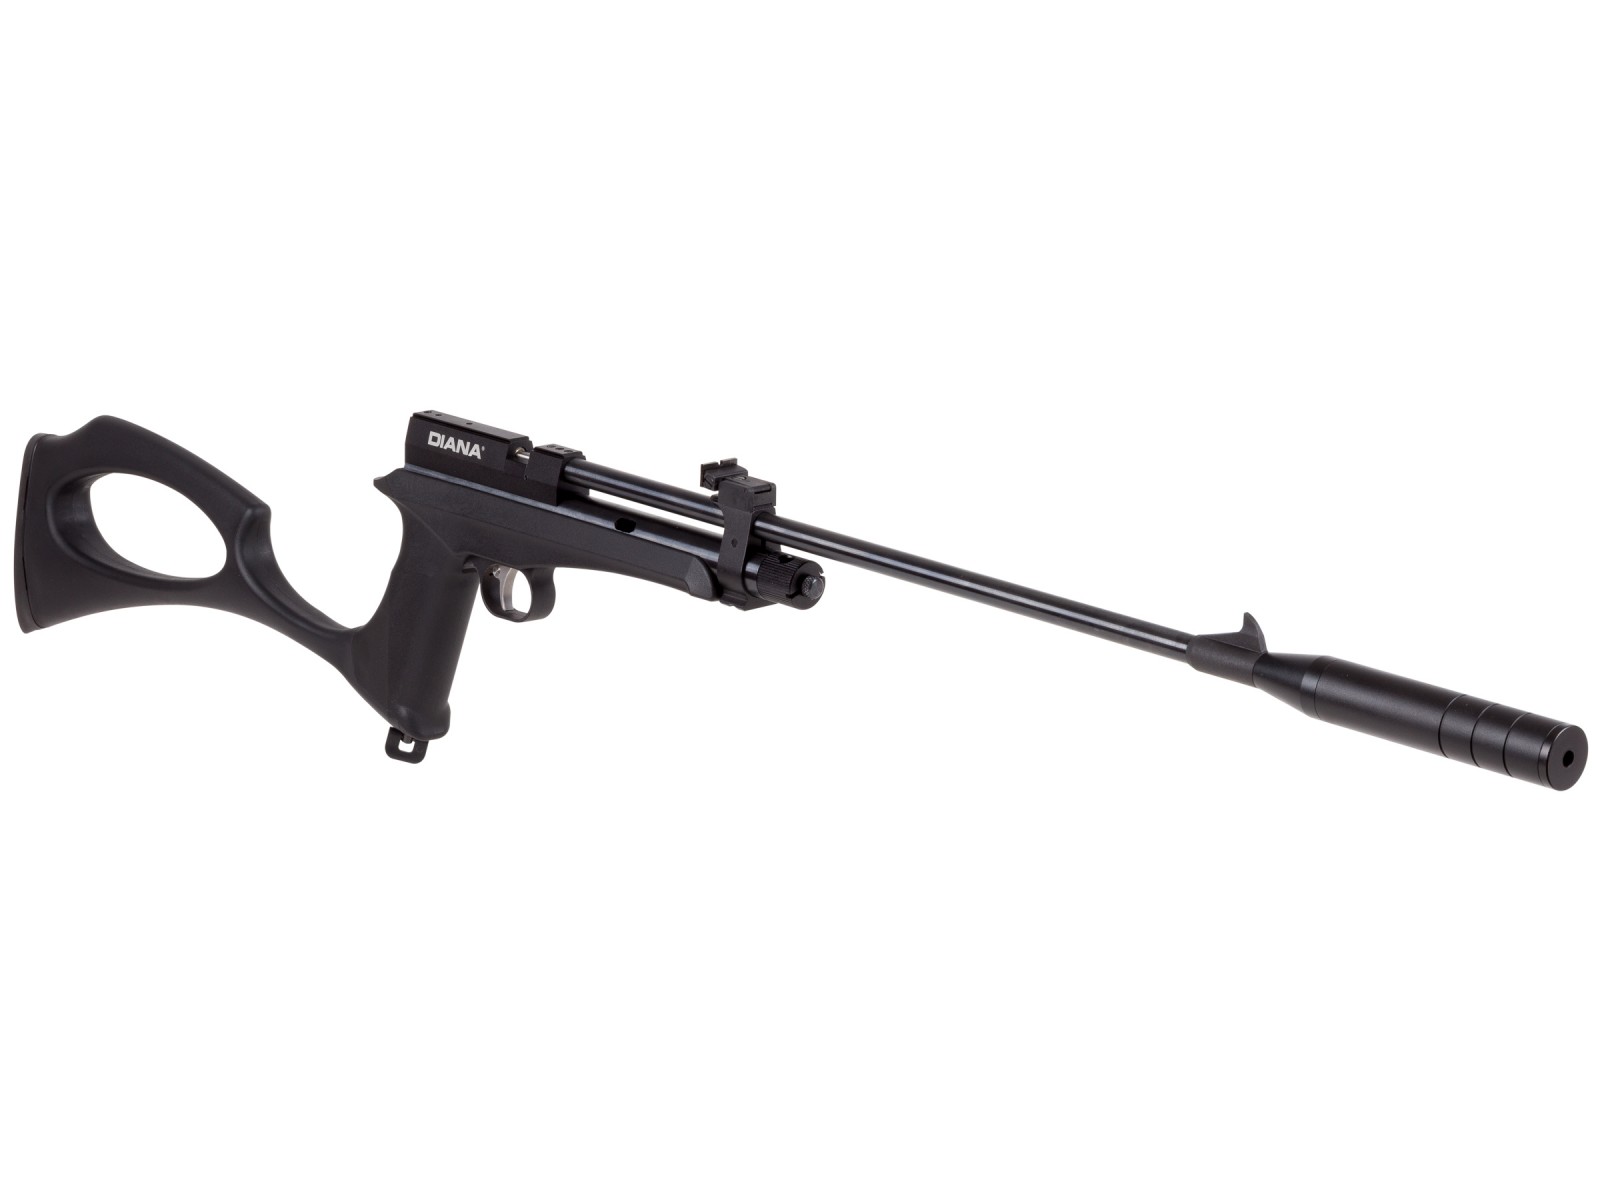 Diana Chaser CO2 Air Rifle Kit